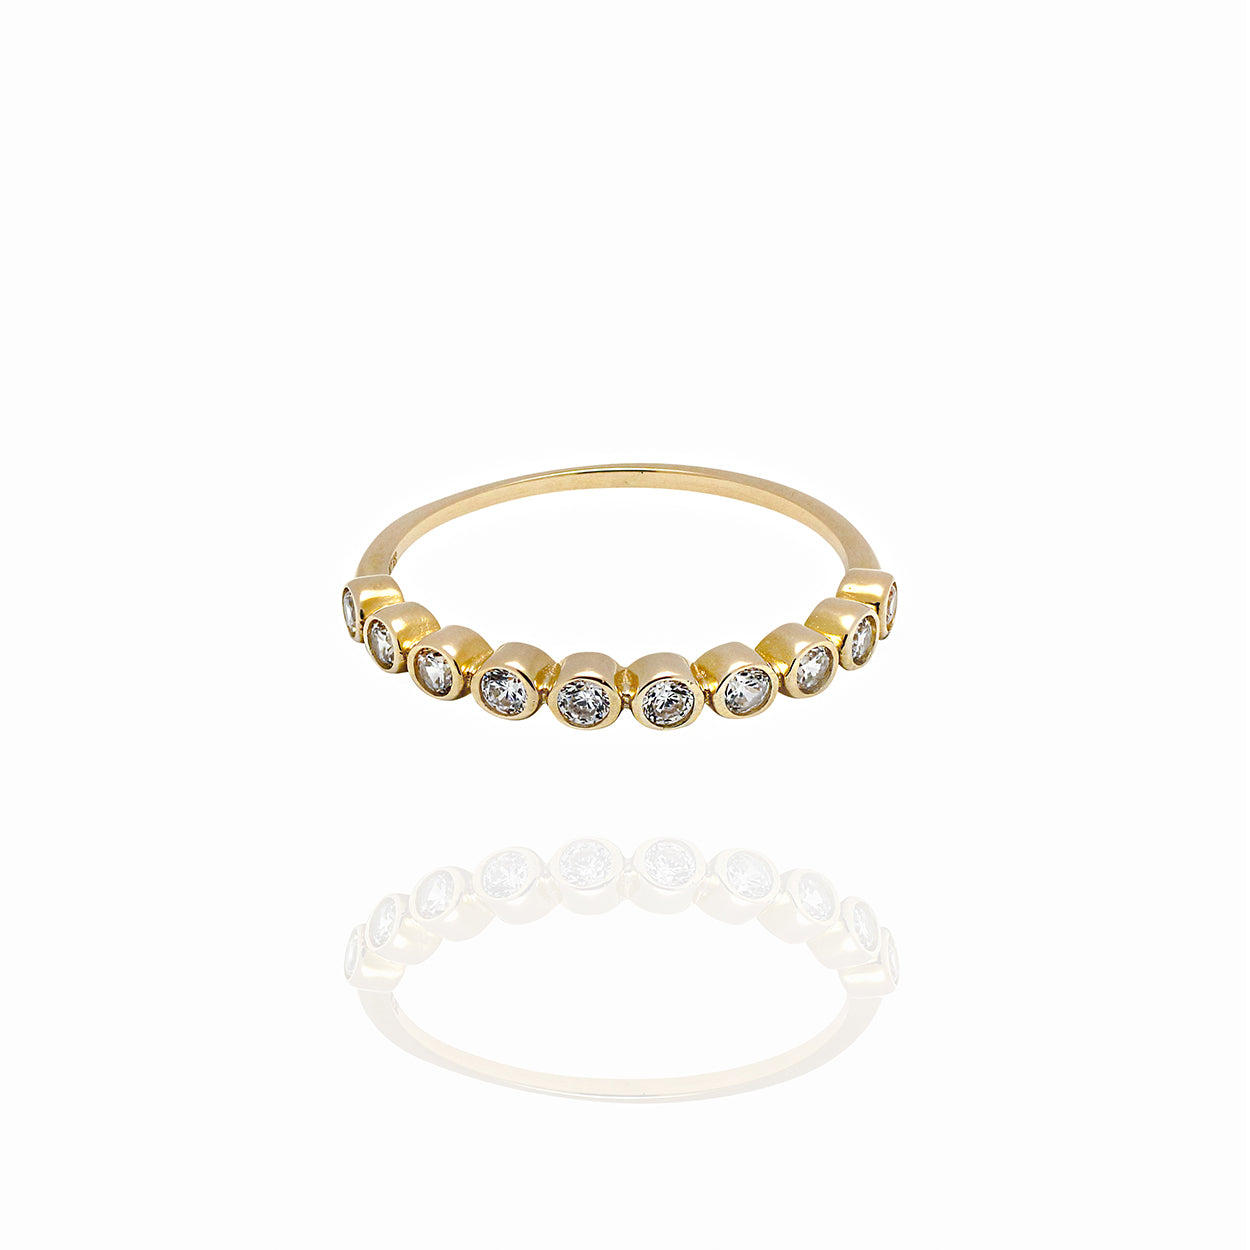 10kt Yellow Gold Ring with Bezel Set Beads of Cubic Zirconia 1